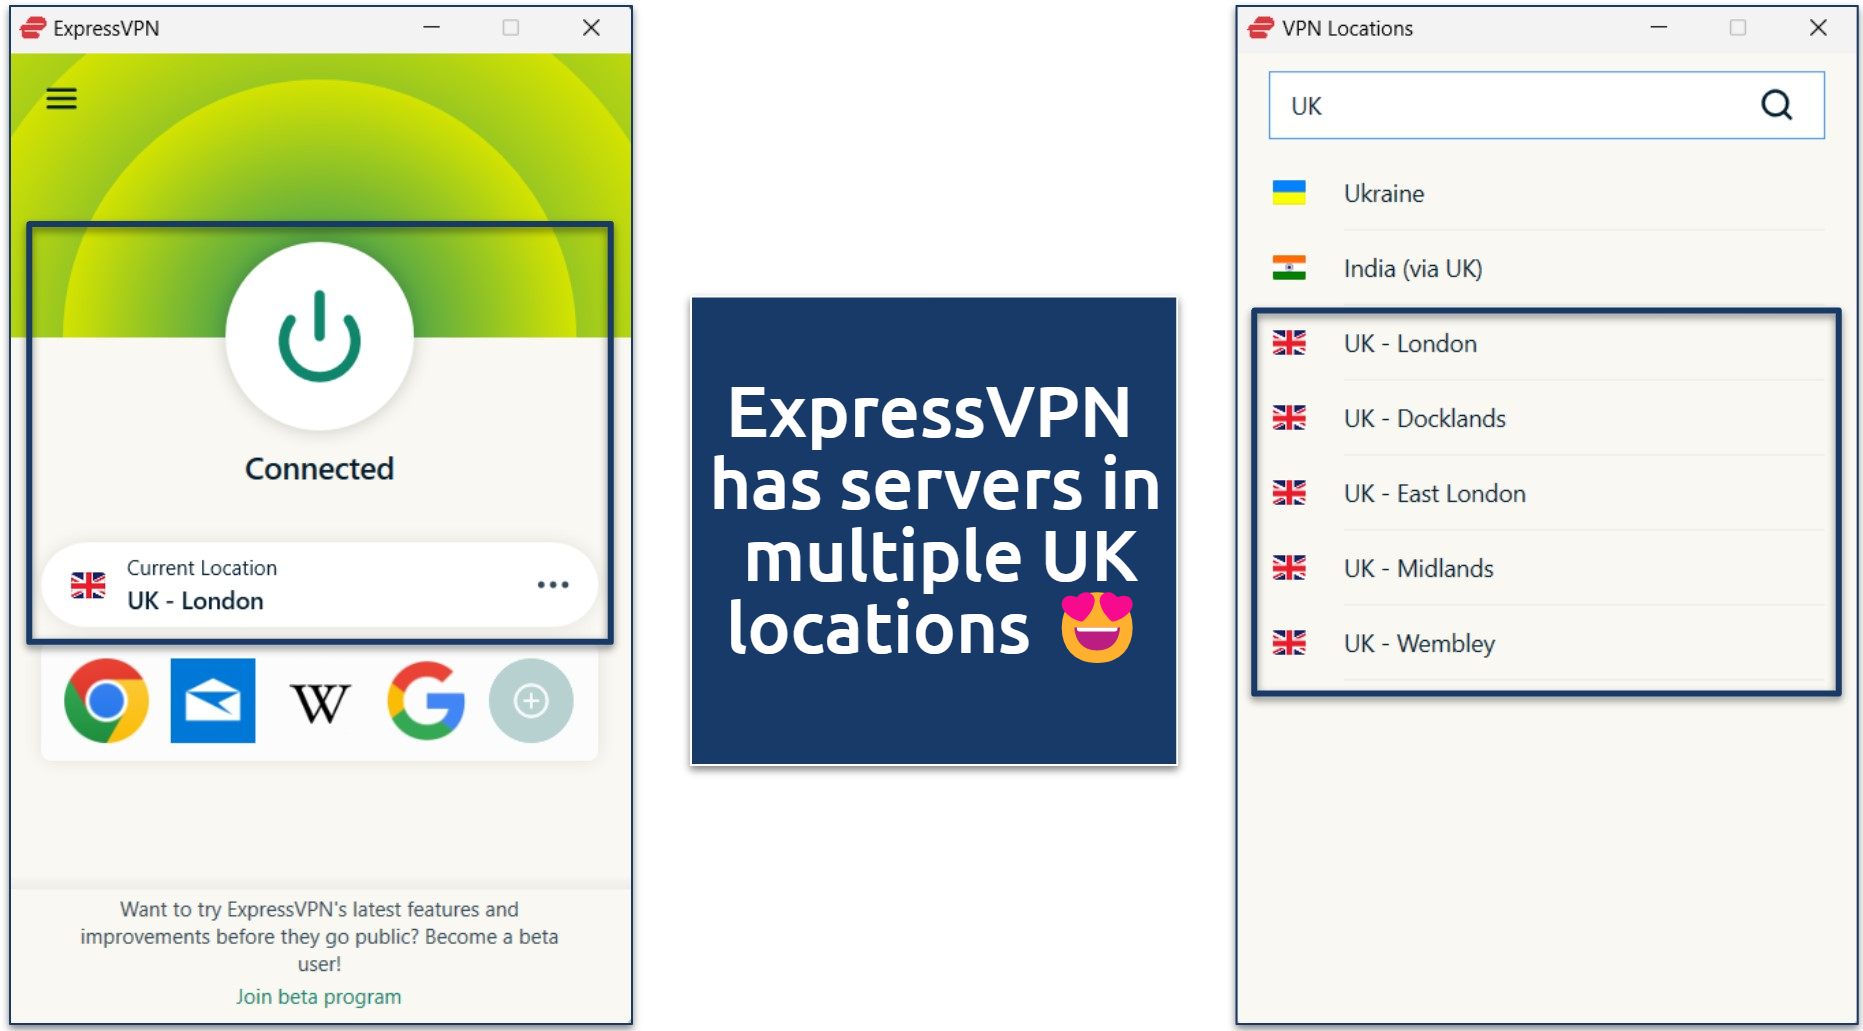 A screenshot of the ExpressVPN app while connected to the UK - London servers as well as a list of its 5 UK server locations.